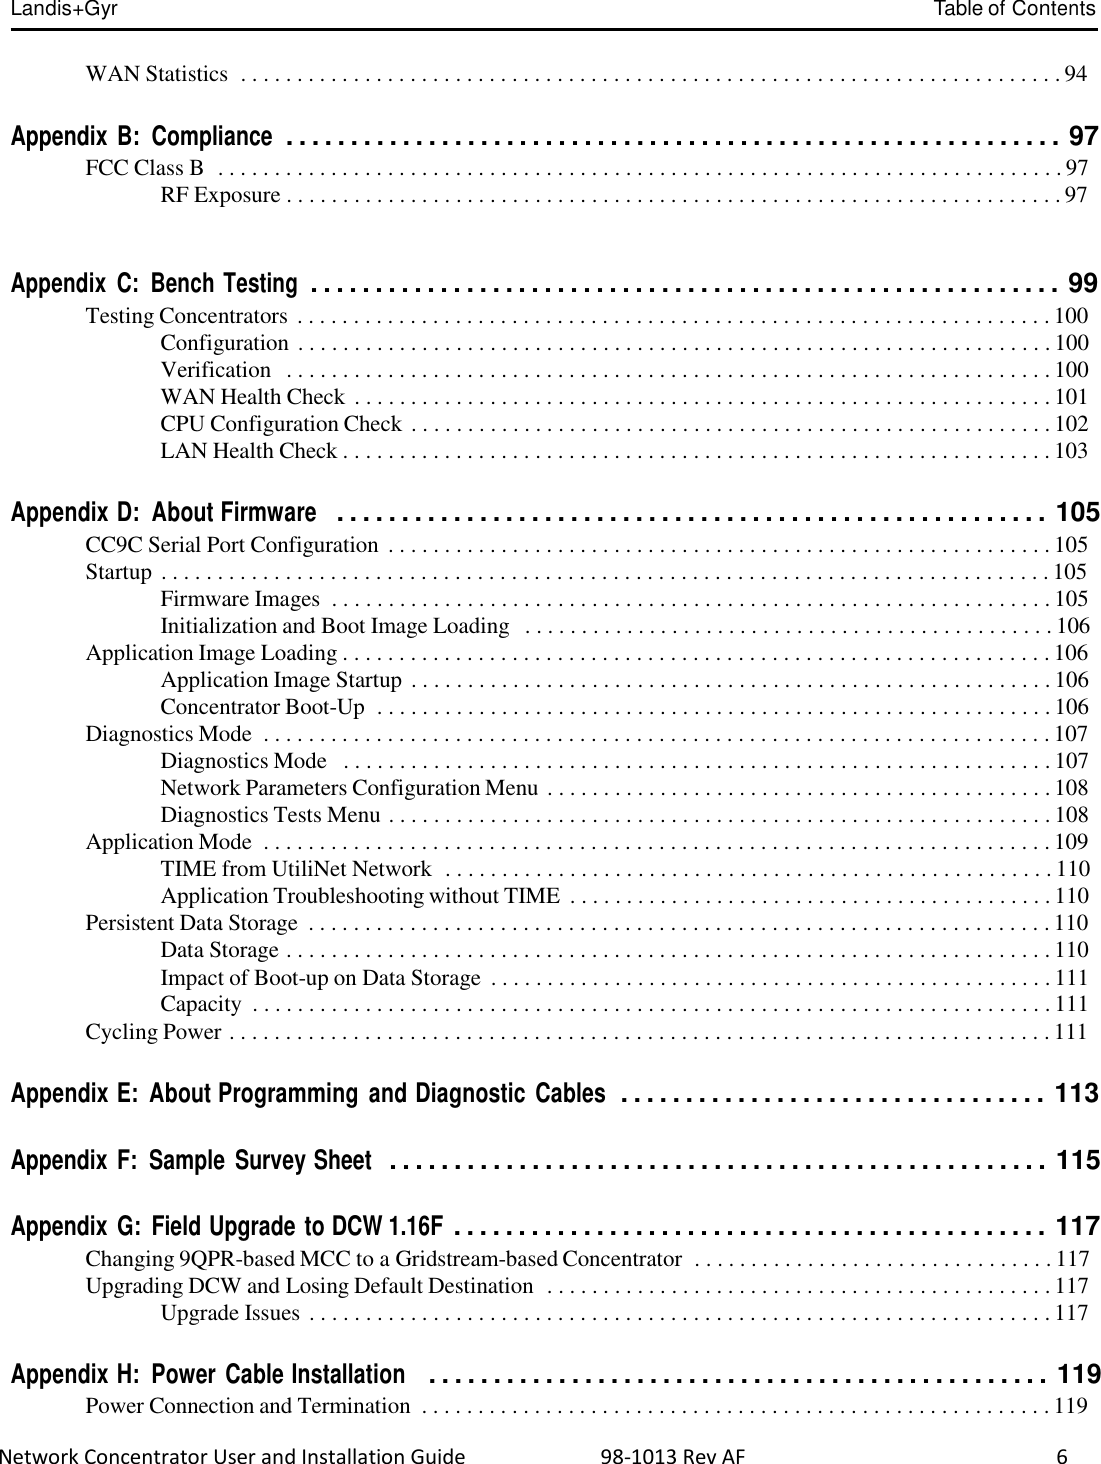  Network Concentrator User and Installation Guide                          98-1013 Rev AF                  6  Landis+Gyr  Table of Contents   WAN Statistics  . . . . . . . . . . . . . . . . . . . . . . . . . . . . . . . . . . . . . . . . . . . . . . . . . . . . . . . . . . . . . . . . . . . . . . . . . 94   Appendix B:  Compliance  . . . . . . . . . . . . . . . . . . . . . . . . . . . . . . . . . . . . . . . . . . . . . . . . . . . . . . . . . . . . 97 FCC Class B  . . . . . . . . . . . . . . . . . . . . . . . . . . . . . . . . . . . . . . . . . . . . . . . . . . . . . . . . . . . . . . . . . . . . . . . . . . . 97 RF Exposure . . . . . . . . . . . . . . . . . . . . . . . . . . . . . . . . . . . . . . . . . . . . . . . . . . . . . . . . . . . . . . . . . . . . . 97   Appendix  C:  Bench Testing  . . . . . . . . . . . . . . . . . . . . . . . . . . . . . . . . . . . . . . . . . . . . . . . . . . . . . . . . . . 99 Testing Concentrators . . . . . . . . . . . . . . . . . . . . . . . . . . . . . . . . . . . . . . . . . . . . . . . . . . . . . . . . . . . . . . . . . . . 100 Configuration . . . . . . . . . . . . . . . . . . . . . . . . . . . . . . . . . . . . . . . . . . . . . . . . . . . . . . . . . . . . . . . . . . . 100 Verification  . . . . . . . . . . . . . . . . . . . . . . . . . . . . . . . . . . . . . . . . . . . . . . . . . . . . . . . . . . . . . . . . . . . . 100 WAN Health Check . . . . . . . . . . . . . . . . . . . . . . . . . . . . . . . . . . . . . . . . . . . . . . . . . . . . . . . . . . . . . . 101 CPU Configuration Check . . . . . . . . . . . . . . . . . . . . . . . . . . . . . . . . . . . . . . . . . . . . . . . . . . . . . . . . . 102 LAN Health Check . . . . . . . . . . . . . . . . . . . . . . . . . . . . . . . . . . . . . . . . . . . . . . . . . . . . . . . . . . . . . . . 103   Appendix D:  About Firmware   . . . . . . . . . . . . . . . . . . . . . . . . . . . . . . . . . . . . . . . . . . . . . . . . . . . . . . . 105 CC9C Serial Port Configuration . . . . . . . . . . . . . . . . . . . . . . . . . . . . . . . . . . . . . . . . . . . . . . . . . . . . . . . . . . . 105 Startup . . . . . . . . . . . . . . . . . . . . . . . . . . . . . . . . . . . . . . . . . . . . . . . . . . . . . . . . . . . . . . . . . . . . . . . . . . . . . . . 105 Firmware Images  . . . . . . . . . . . . . . . . . . . . . . . . . . . . . . . . . . . . . . . . . . . . . . . . . . . . . . . . . . . . . . . . 105 Initialization and Boot Image Loading   . . . . . . . . . . . . . . . . . . . . . . . . . . . . . . . . . . . . . . . . . . . . . . . 106 Application Image Loading . . . . . . . . . . . . . . . . . . . . . . . . . . . . . . . . . . . . . . . . . . . . . . . . . . . . . . . . . . . . . . . 106 Application Image Startup . . . . . . . . . . . . . . . . . . . . . . . . . . . . . . . . . . . . . . . . . . . . . . . . . . . . . . . . . 106 Concentrator Boot-Up  . . . . . . . . . . . . . . . . . . . . . . . . . . . . . . . . . . . . . . . . . . . . . . . . . . . . . . . . . . . . 106 Diagnostics Mode  . . . . . . . . . . . . . . . . . . . . . . . . . . . . . . . . . . . . . . . . . . . . . . . . . . . . . . . . . . . . . . . . . . . . . . 107 Diagnostics Mode   . . . . . . . . . . . . . . . . . . . . . . . . . . . . . . . . . . . . . . . . . . . . . . . . . . . . . . . . . . . . . . . 107 Network Parameters Configuration Menu . . . . . . . . . . . . . . . . . . . . . . . . . . . . . . . . . . . . . . . . . . . . . 108 Diagnostics Tests Menu . . . . . . . . . . . . . . . . . . . . . . . . . . . . . . . . . . . . . . . . . . . . . . . . . . . . . . . . . . . 108 Application Mode  . . . . . . . . . . . . . . . . . . . . . . . . . . . . . . . . . . . . . . . . . . . . . . . . . . . . . . . . . . . . . . . . . . . . . . 109 TIME from UtiliNet Network  . . . . . . . . . . . . . . . . . . . . . . . . . . . . . . . . . . . . . . . . . . . . . . . . . . . . . . 110 Application Troubleshooting without TIME  . . . . . . . . . . . . . . . . . . . . . . . . . . . . . . . . . . . . . . . . . . . 110 Persistent Data Storage  . . . . . . . . . . . . . . . . . . . . . . . . . . . . . . . . . . . . . . . . . . . . . . . . . . . . . . . . . . . . . . . . . . 110 Data Storage . . . . . . . . . . . . . . . . . . . . . . . . . . . . . . . . . . . . . . . . . . . . . . . . . . . . . . . . . . . . . . . . . . . . 110 Impact of Boot-up on Data Storage  . . . . . . . . . . . . . . . . . . . . . . . . . . . . . . . . . . . . . . . . . . . . . . . . . . 111 Capacity  . . . . . . . . . . . . . . . . . . . . . . . . . . . . . . . . . . . . . . . . . . . . . . . . . . . . . . . . . . . . . . . . . . . . . . . 111 Cycling Power . . . . . . . . . . . . . . . . . . . . . . . . . . . . . . . . . . . . . . . . . . . . . . . . . . . . . . . . . . . . . . . . . . . . . . . . . 111   Appendix E:  About Programming  and Diagnostic  Cables  . . . . . . . . . . . . . . . . . . . . . . . . . . . . . . . . . 113   Appendix F:  Sample  Survey Sheet  . . . . . . . . . . . . . . . . . . . . . . . . . . . . . . . . . . . . . . . . . . . . . . . . . . . 115   Appendix G:  Field Upgrade to DCW 1.16F . . . . . . . . . . . . . . . . . . . . . . . . . . . . . . . . . . . . . . . . . . . . . . 117 Changing 9QPR-based MCC to a Gridstream-based Concentrator  . . . . . . . . . . . . . . . . . . . . . . . . . . . . . . . . 117 Upgrading DCW and Losing Default Destination  . . . . . . . . . . . . . . . . . . . . . . . . . . . . . . . . . . . . . . . . . . . . . 117 Upgrade Issues . . . . . . . . . . . . . . . . . . . . . . . . . . . . . . . . . . . . . . . . . . . . . . . . . . . . . . . . . . . . . . . . . . 117   Appendix H:  Power  Cable Installation   . . . . . . . . . . . . . . . . . . . . . . . . . . . . . . . . . . . . . . . . . . . . . . . . 119 Power Connection and Termination  . . . . . . . . . . . . . . . . . . . . . . . . . . . . . . . . . . . . . . . . . . . . . . . . . . . . . . . . 119 